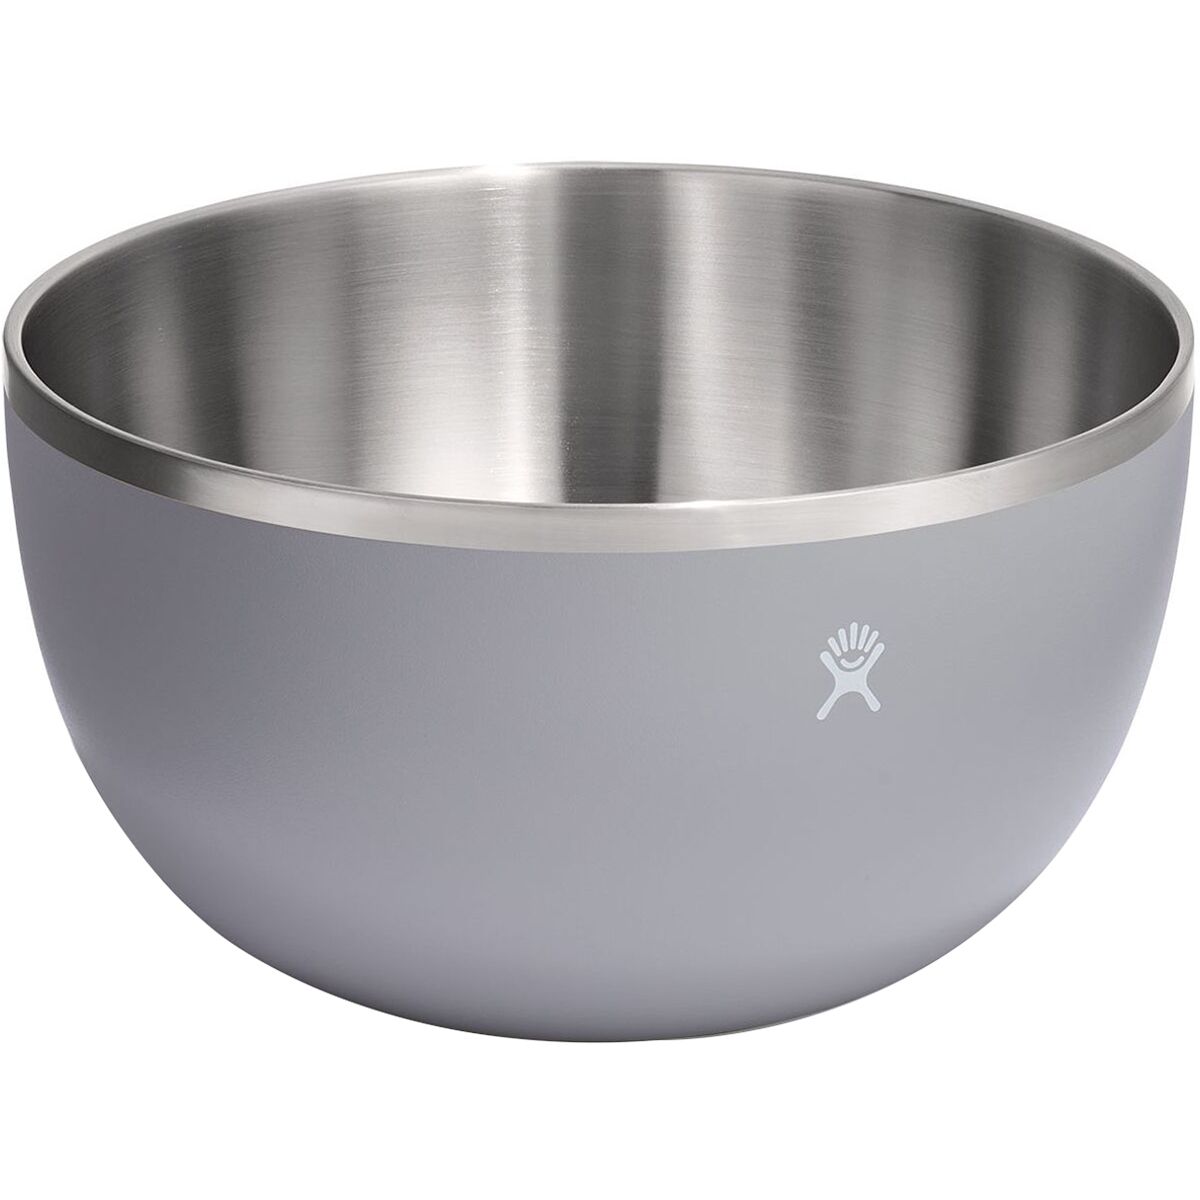 5-Qt Bowl with Lid in Birch - Coolers & Hydration, Hydro Flask